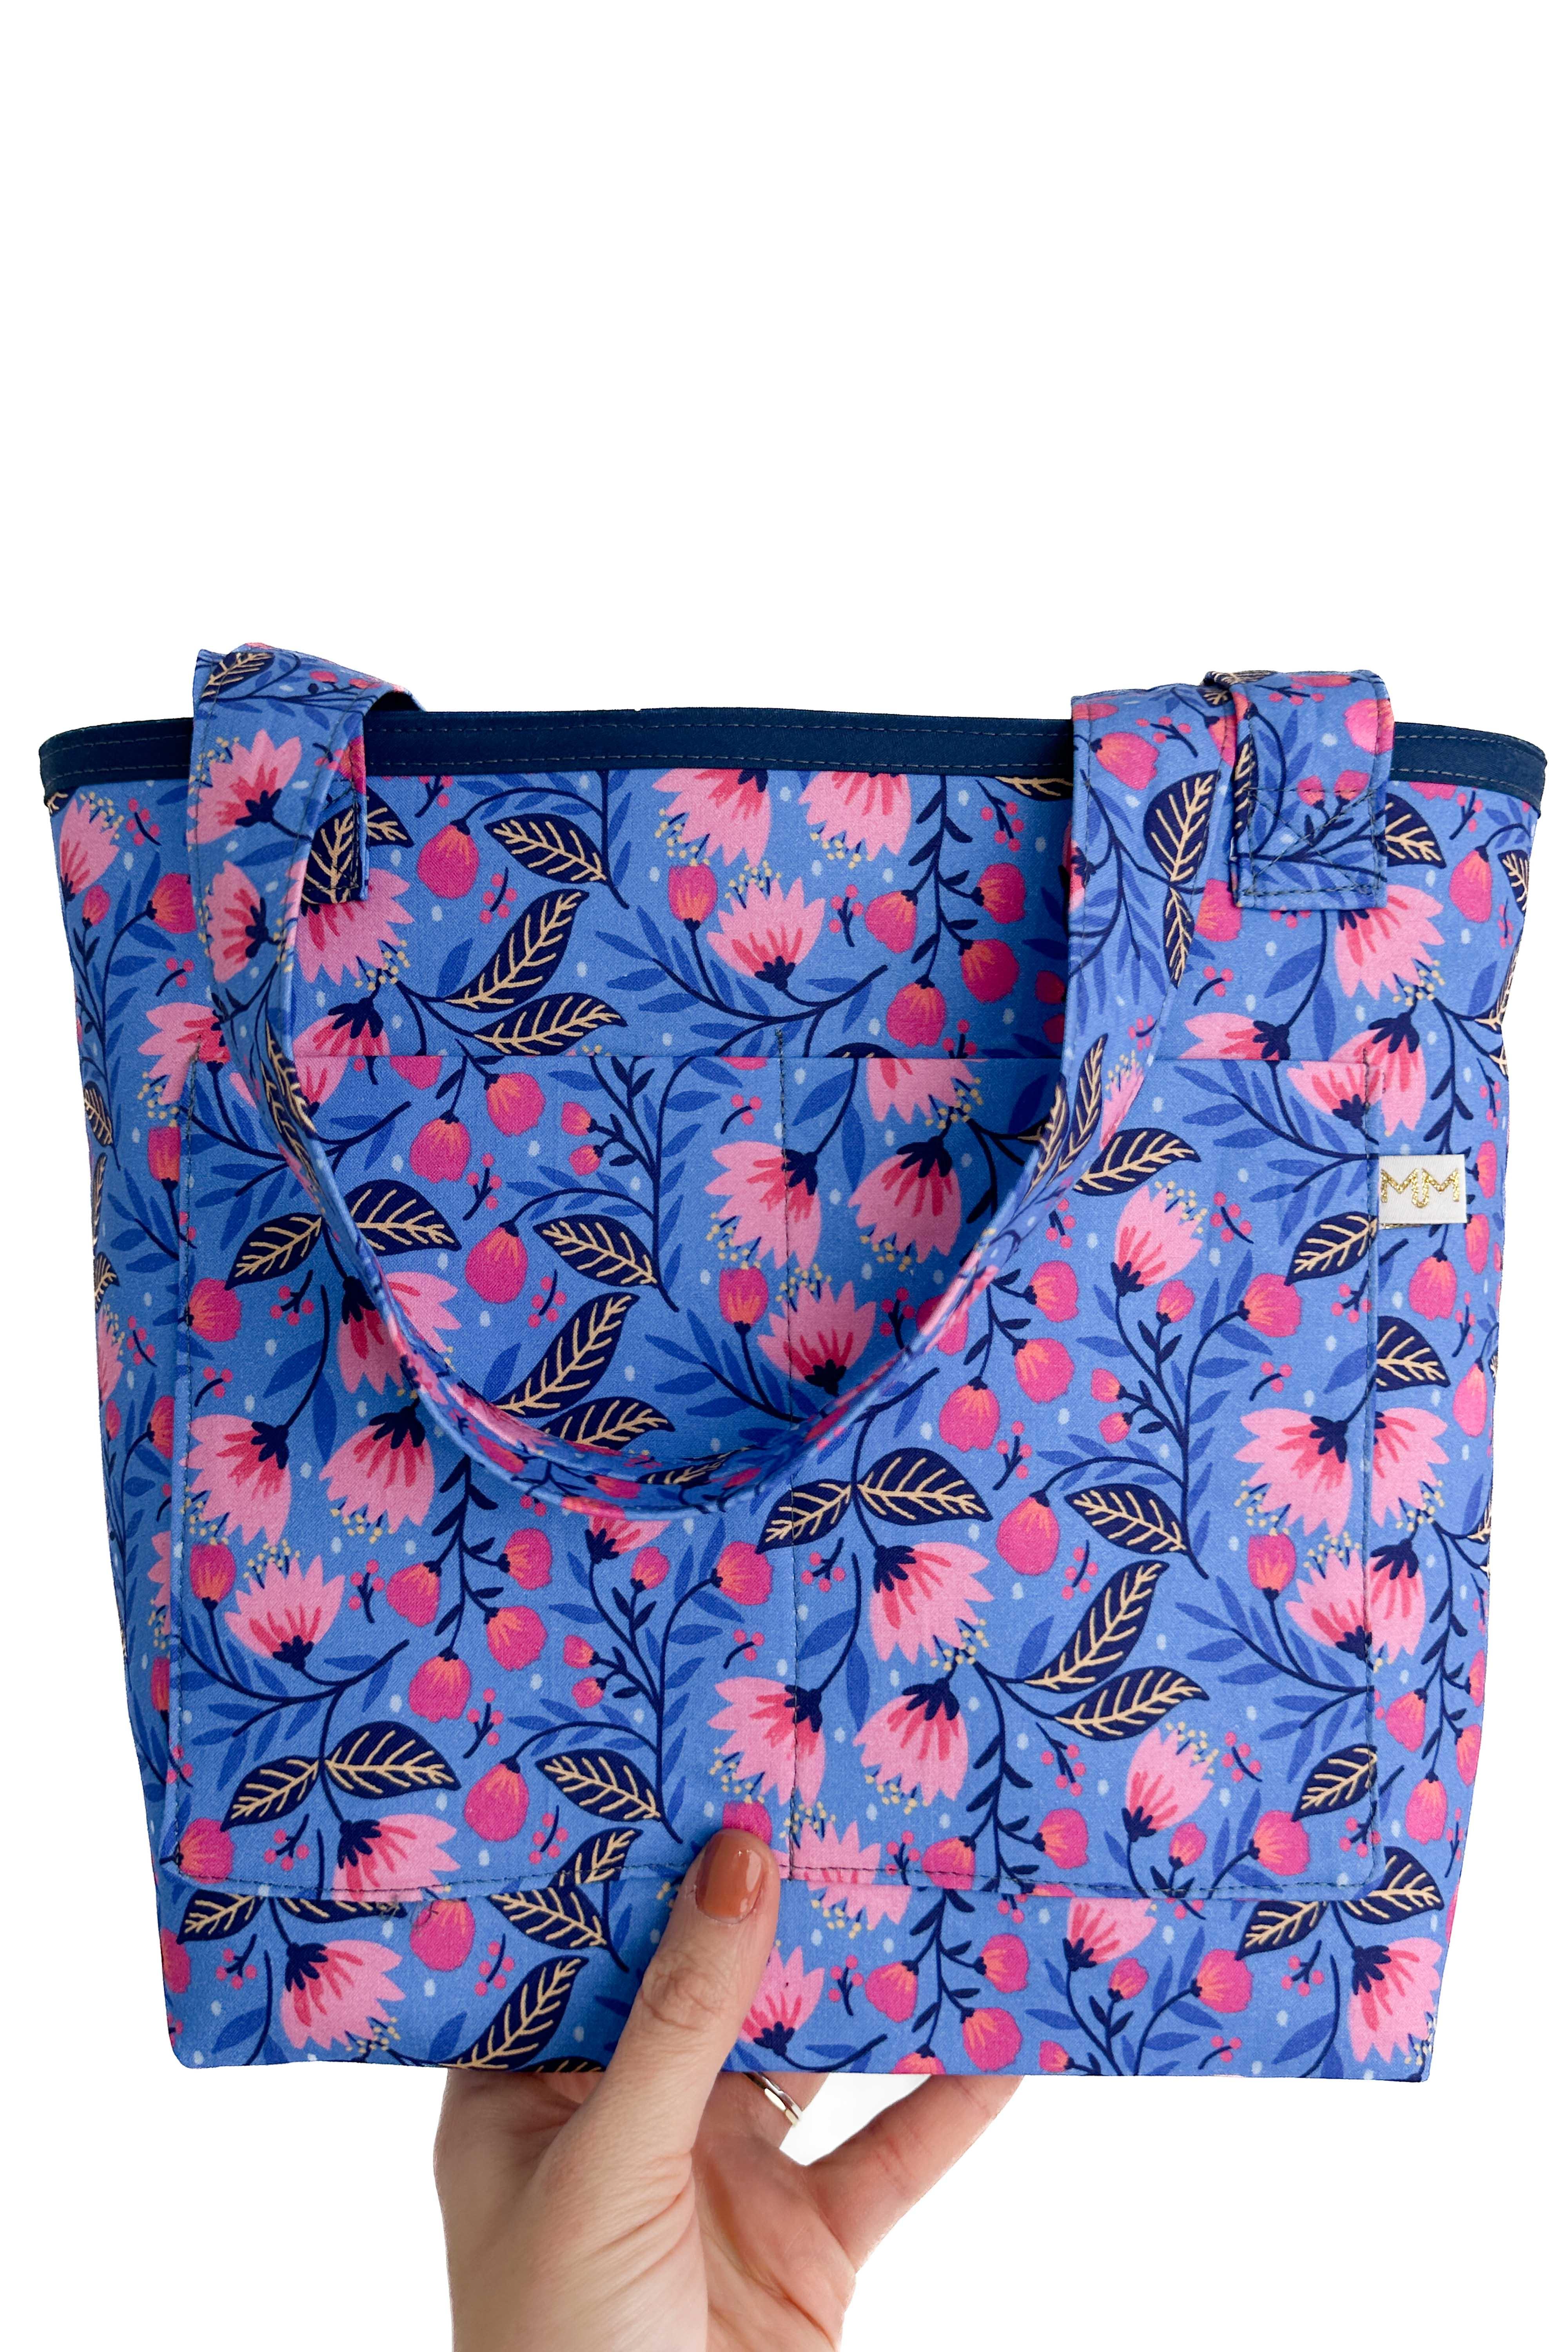 Bay Blossoms Mini Leak-proof Tote Bag READY TO SHIP - Modern Makerie